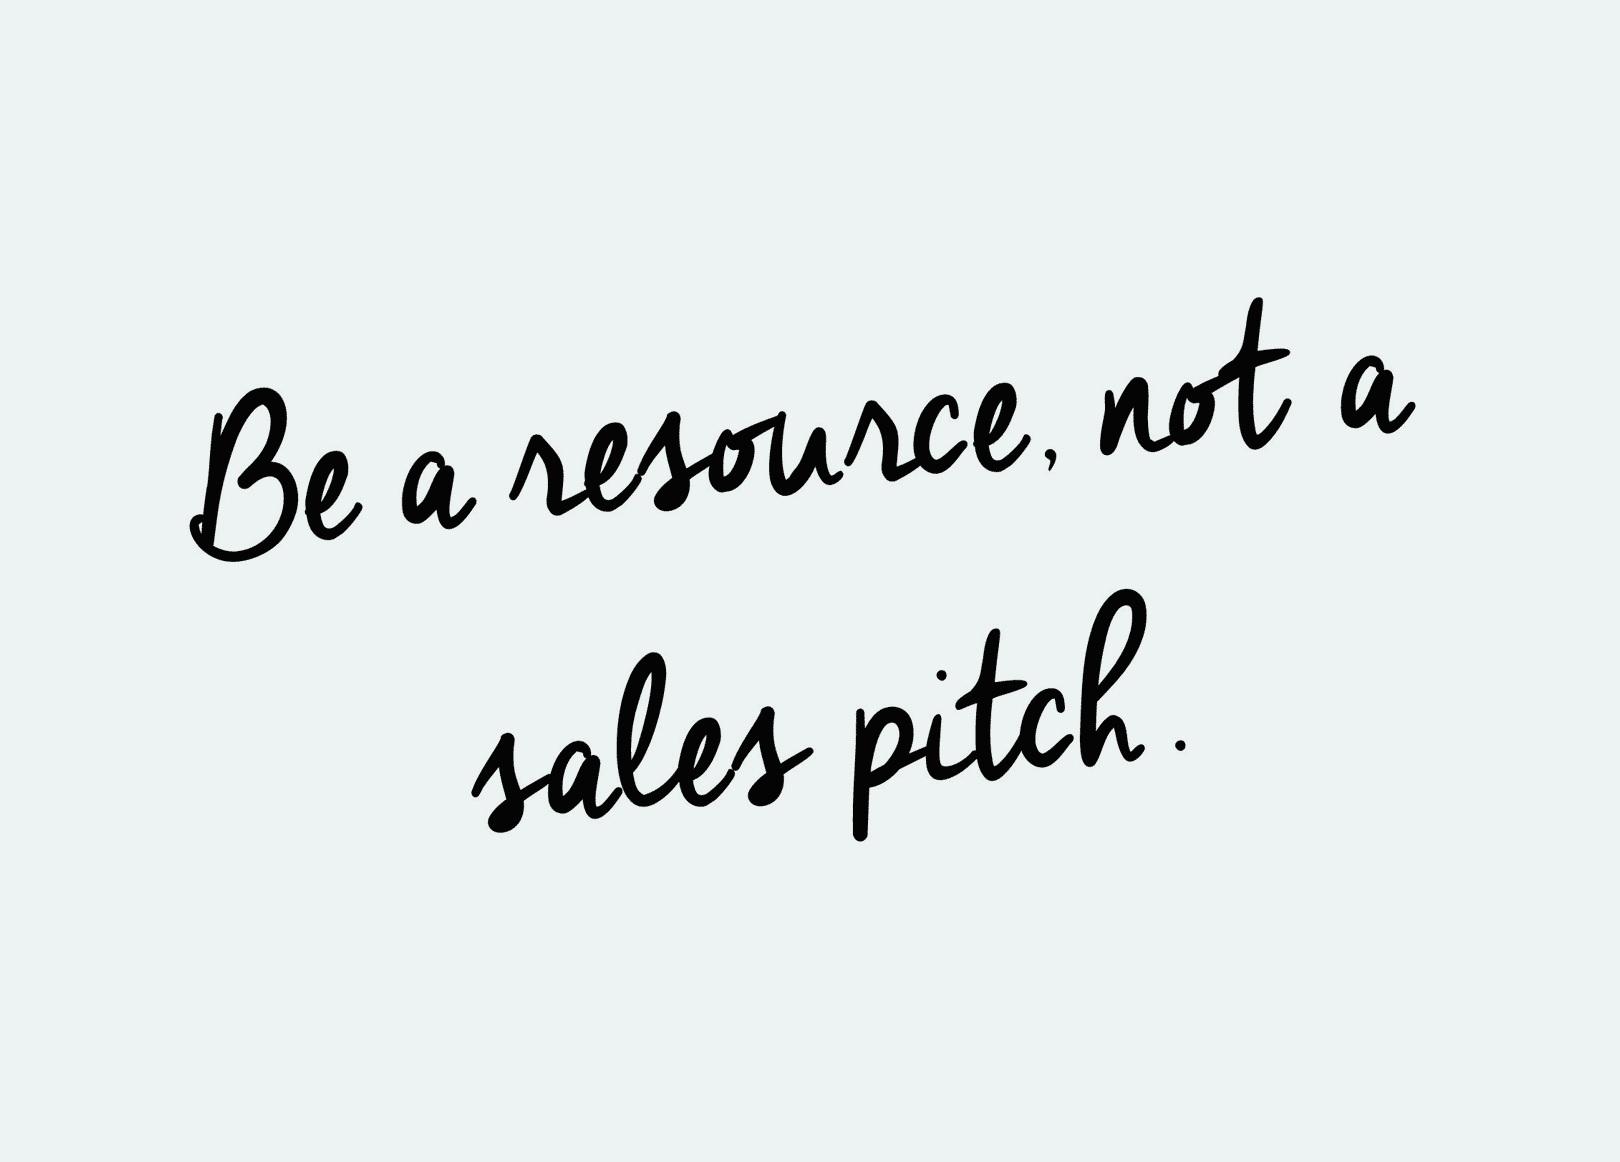 https://zestybrands.ca/wp-content/uploads/2017/10/branding-tips-vancouver-agency-be-a-resource-quote.gif